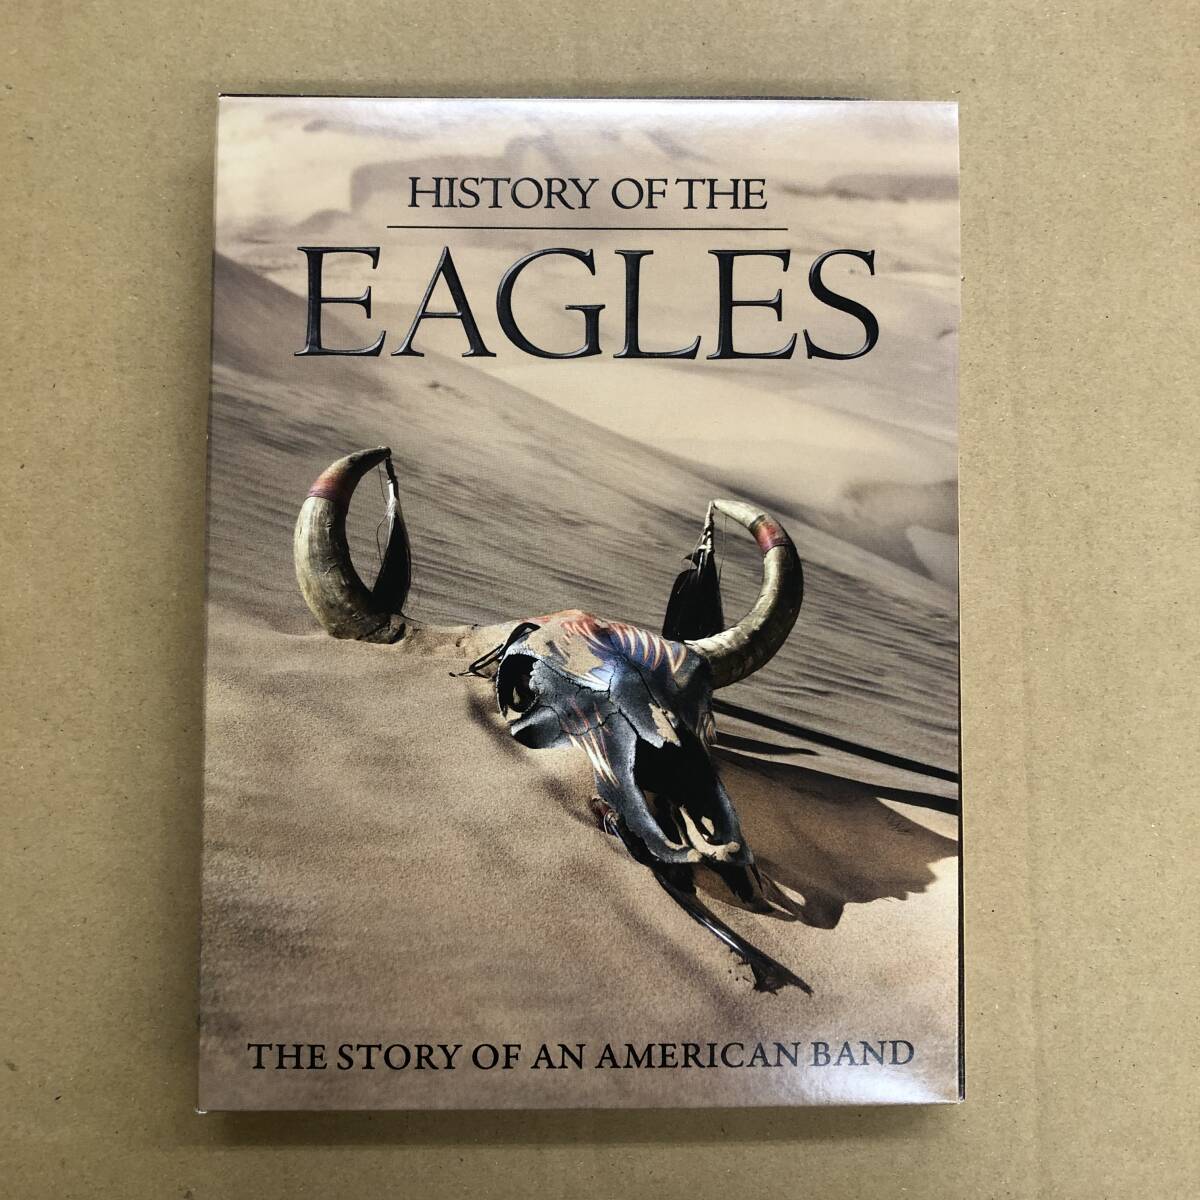 (3DVD) Eagles - History of the Eagles【5099993479196】輸入盤 イーグルス リージョンコード1の画像1